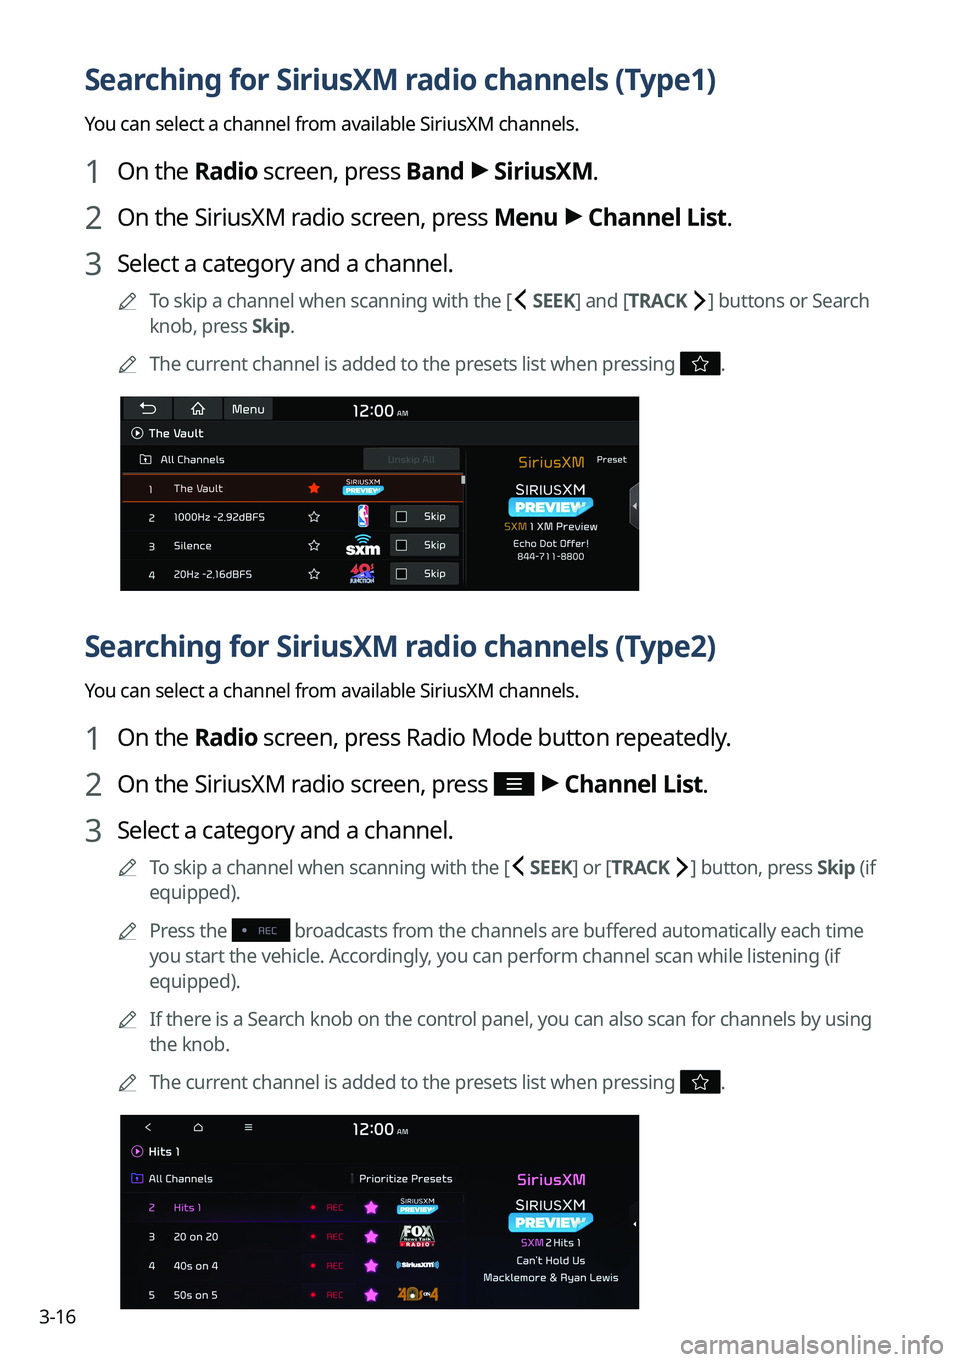 KIA NIRO PHEV 2022  Navigation System Quick Reference Guide 3-16
Searching for SiriusXM radio channels (Type1)
You can select a channel from available SiriusXM channels. 
1 On the Radio screen, press Band >
 SiriusXM.
2 On the SiriusXM radio screen, press Menu